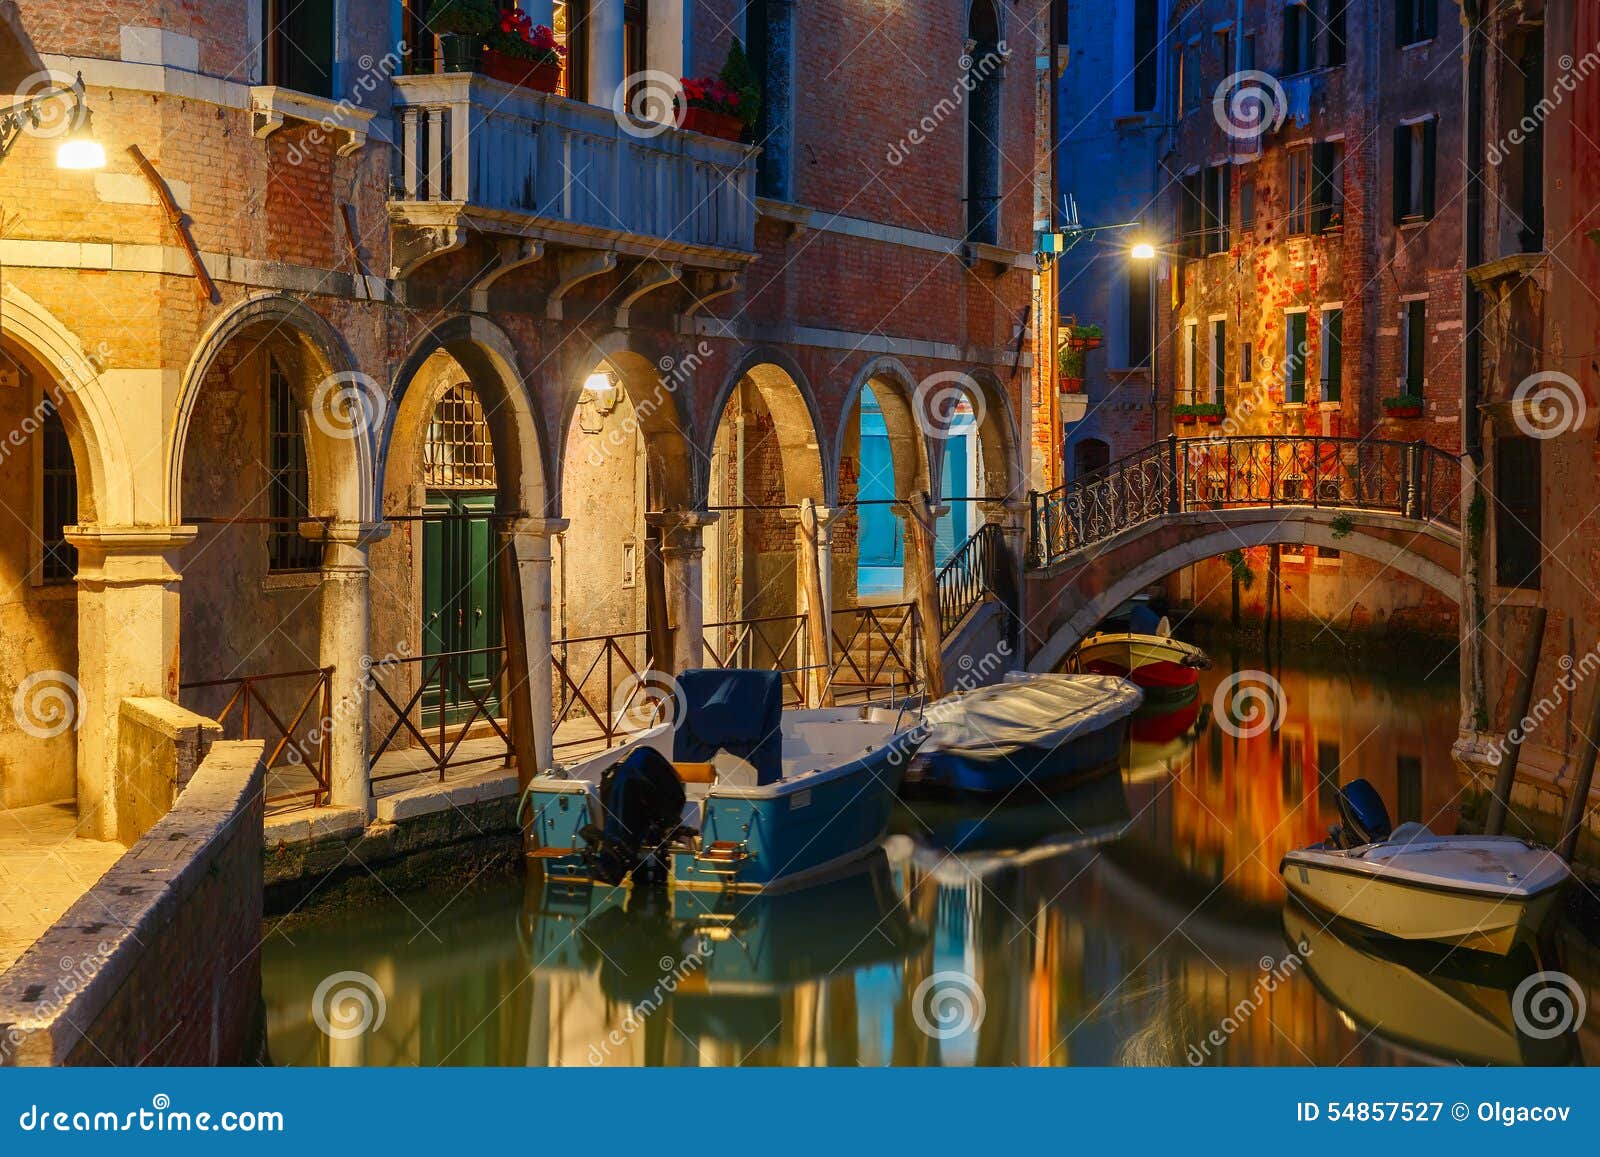 night lateral canal and bridge in venice, italy